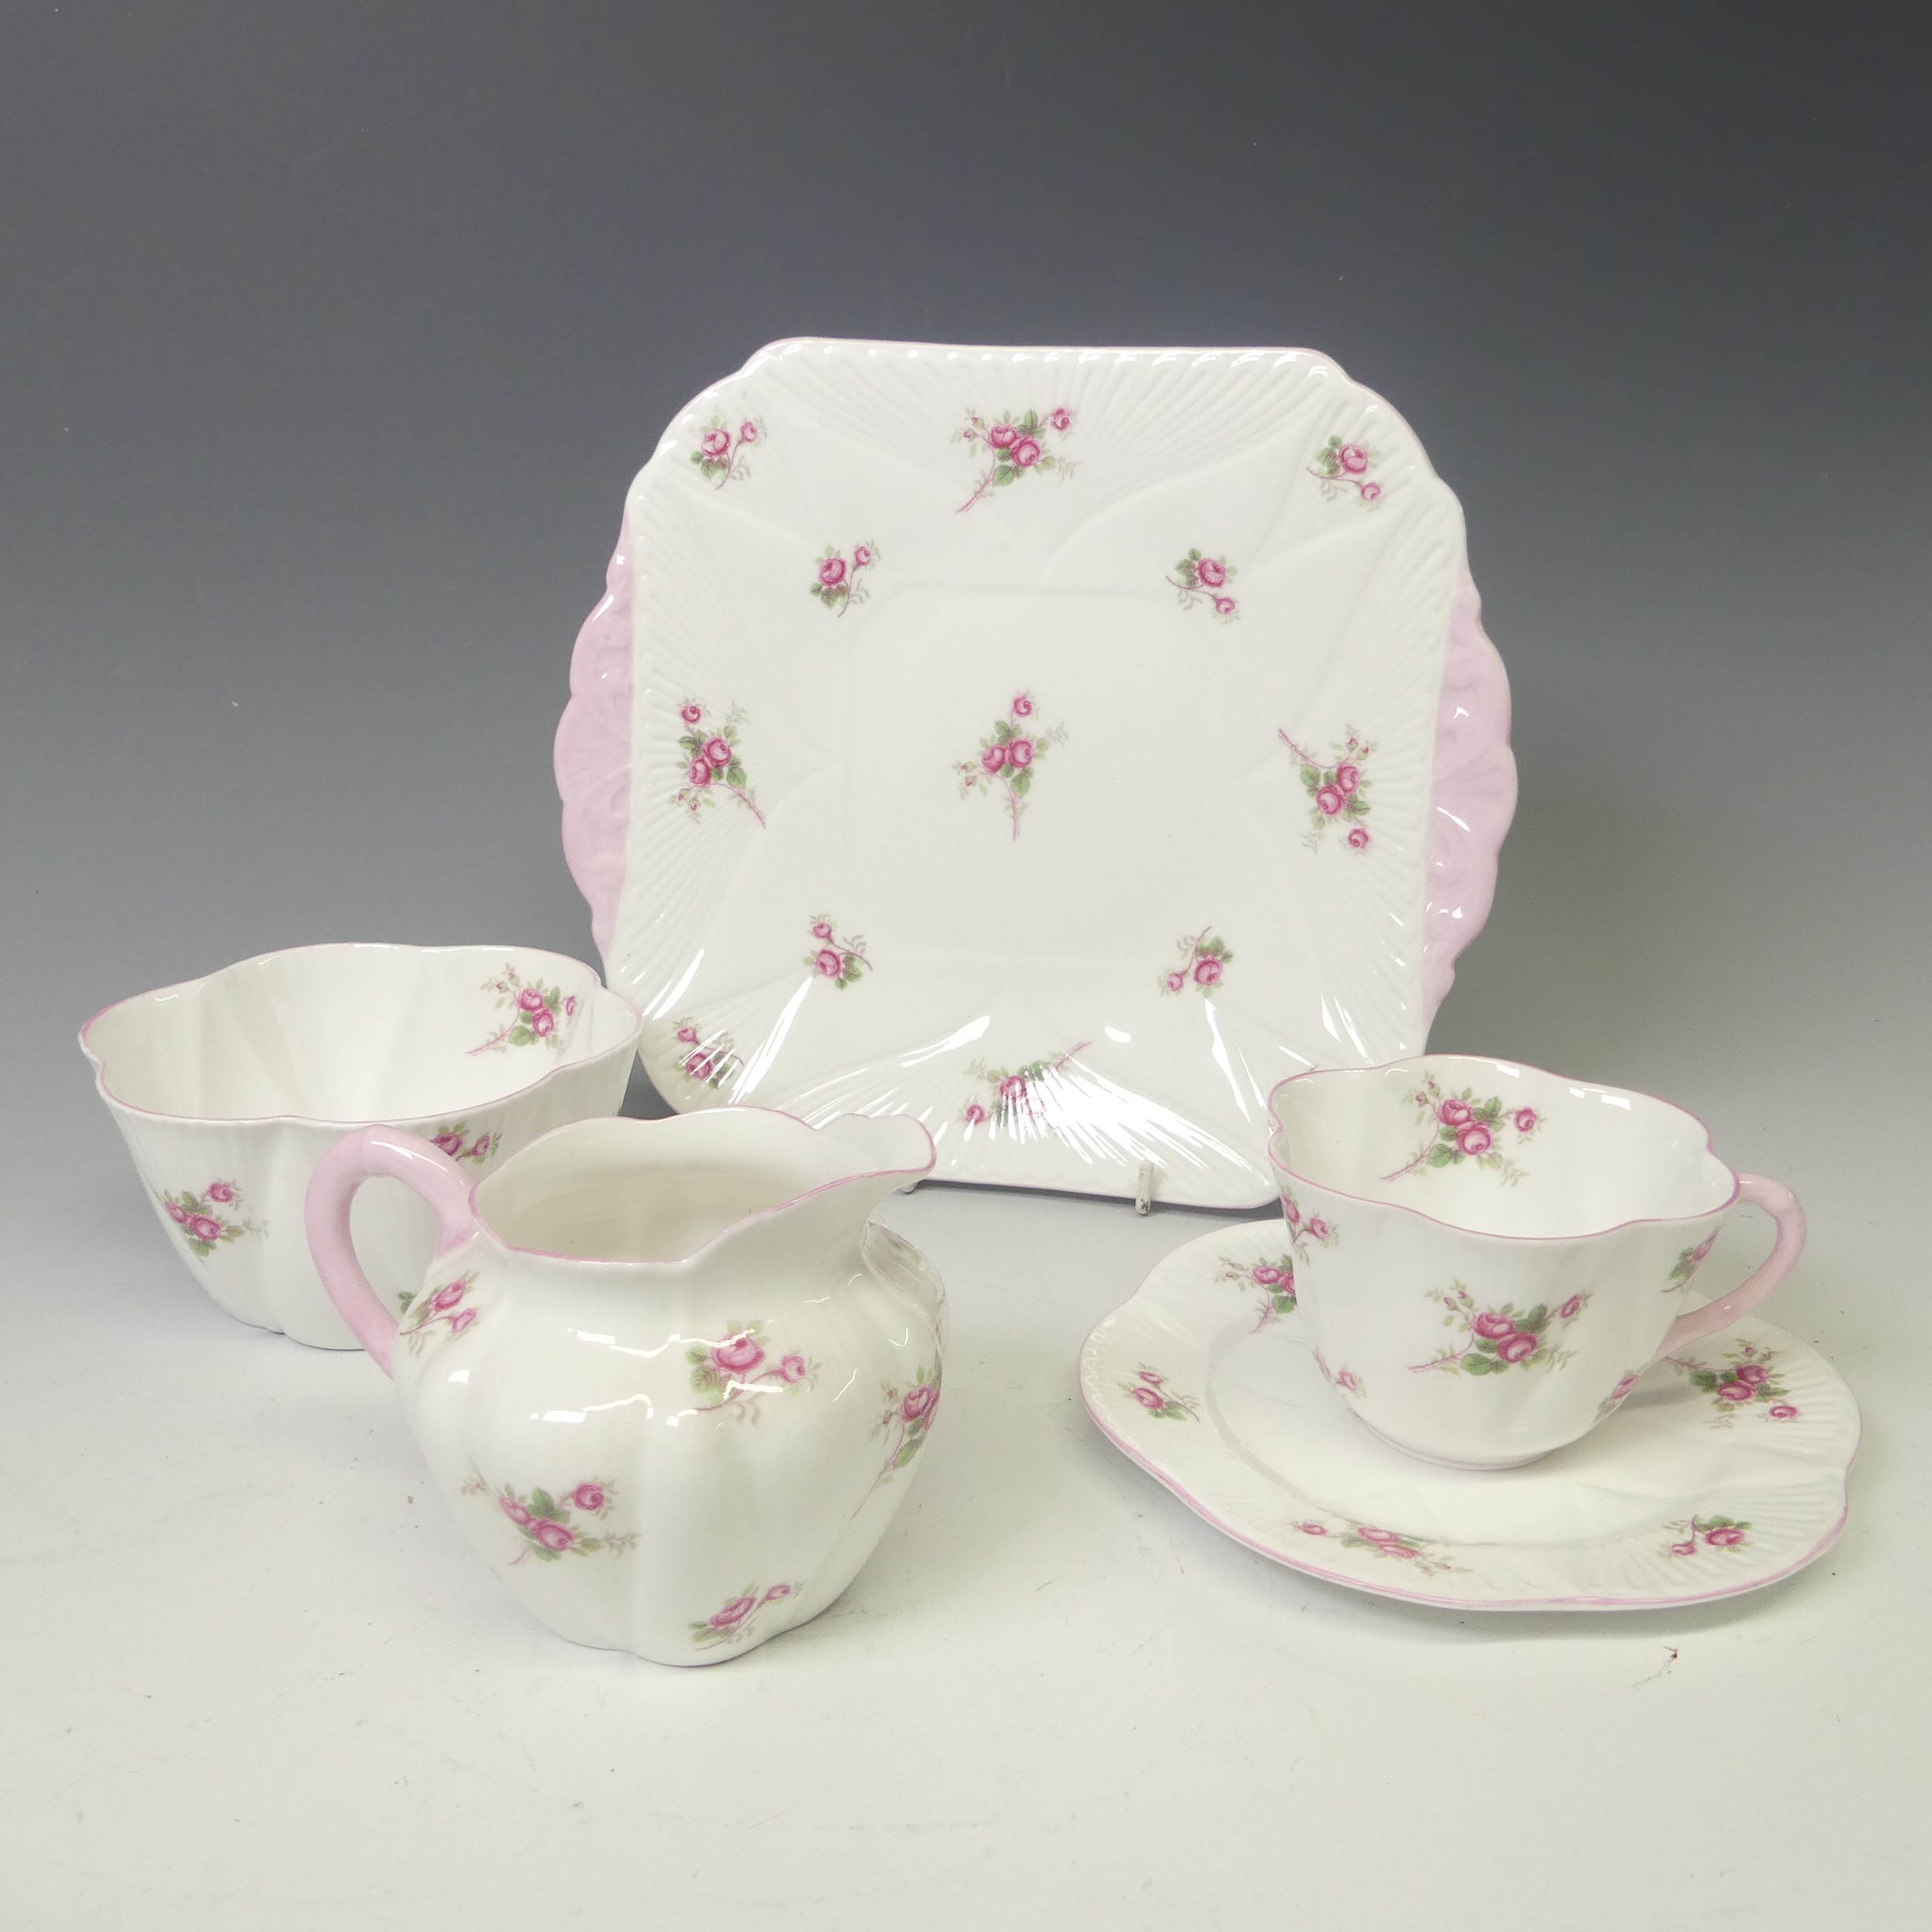 A Shelley 'Bridal Rose' pattern Tea Set, comprising six Cups and Saucers, Tea Plates, one broken,